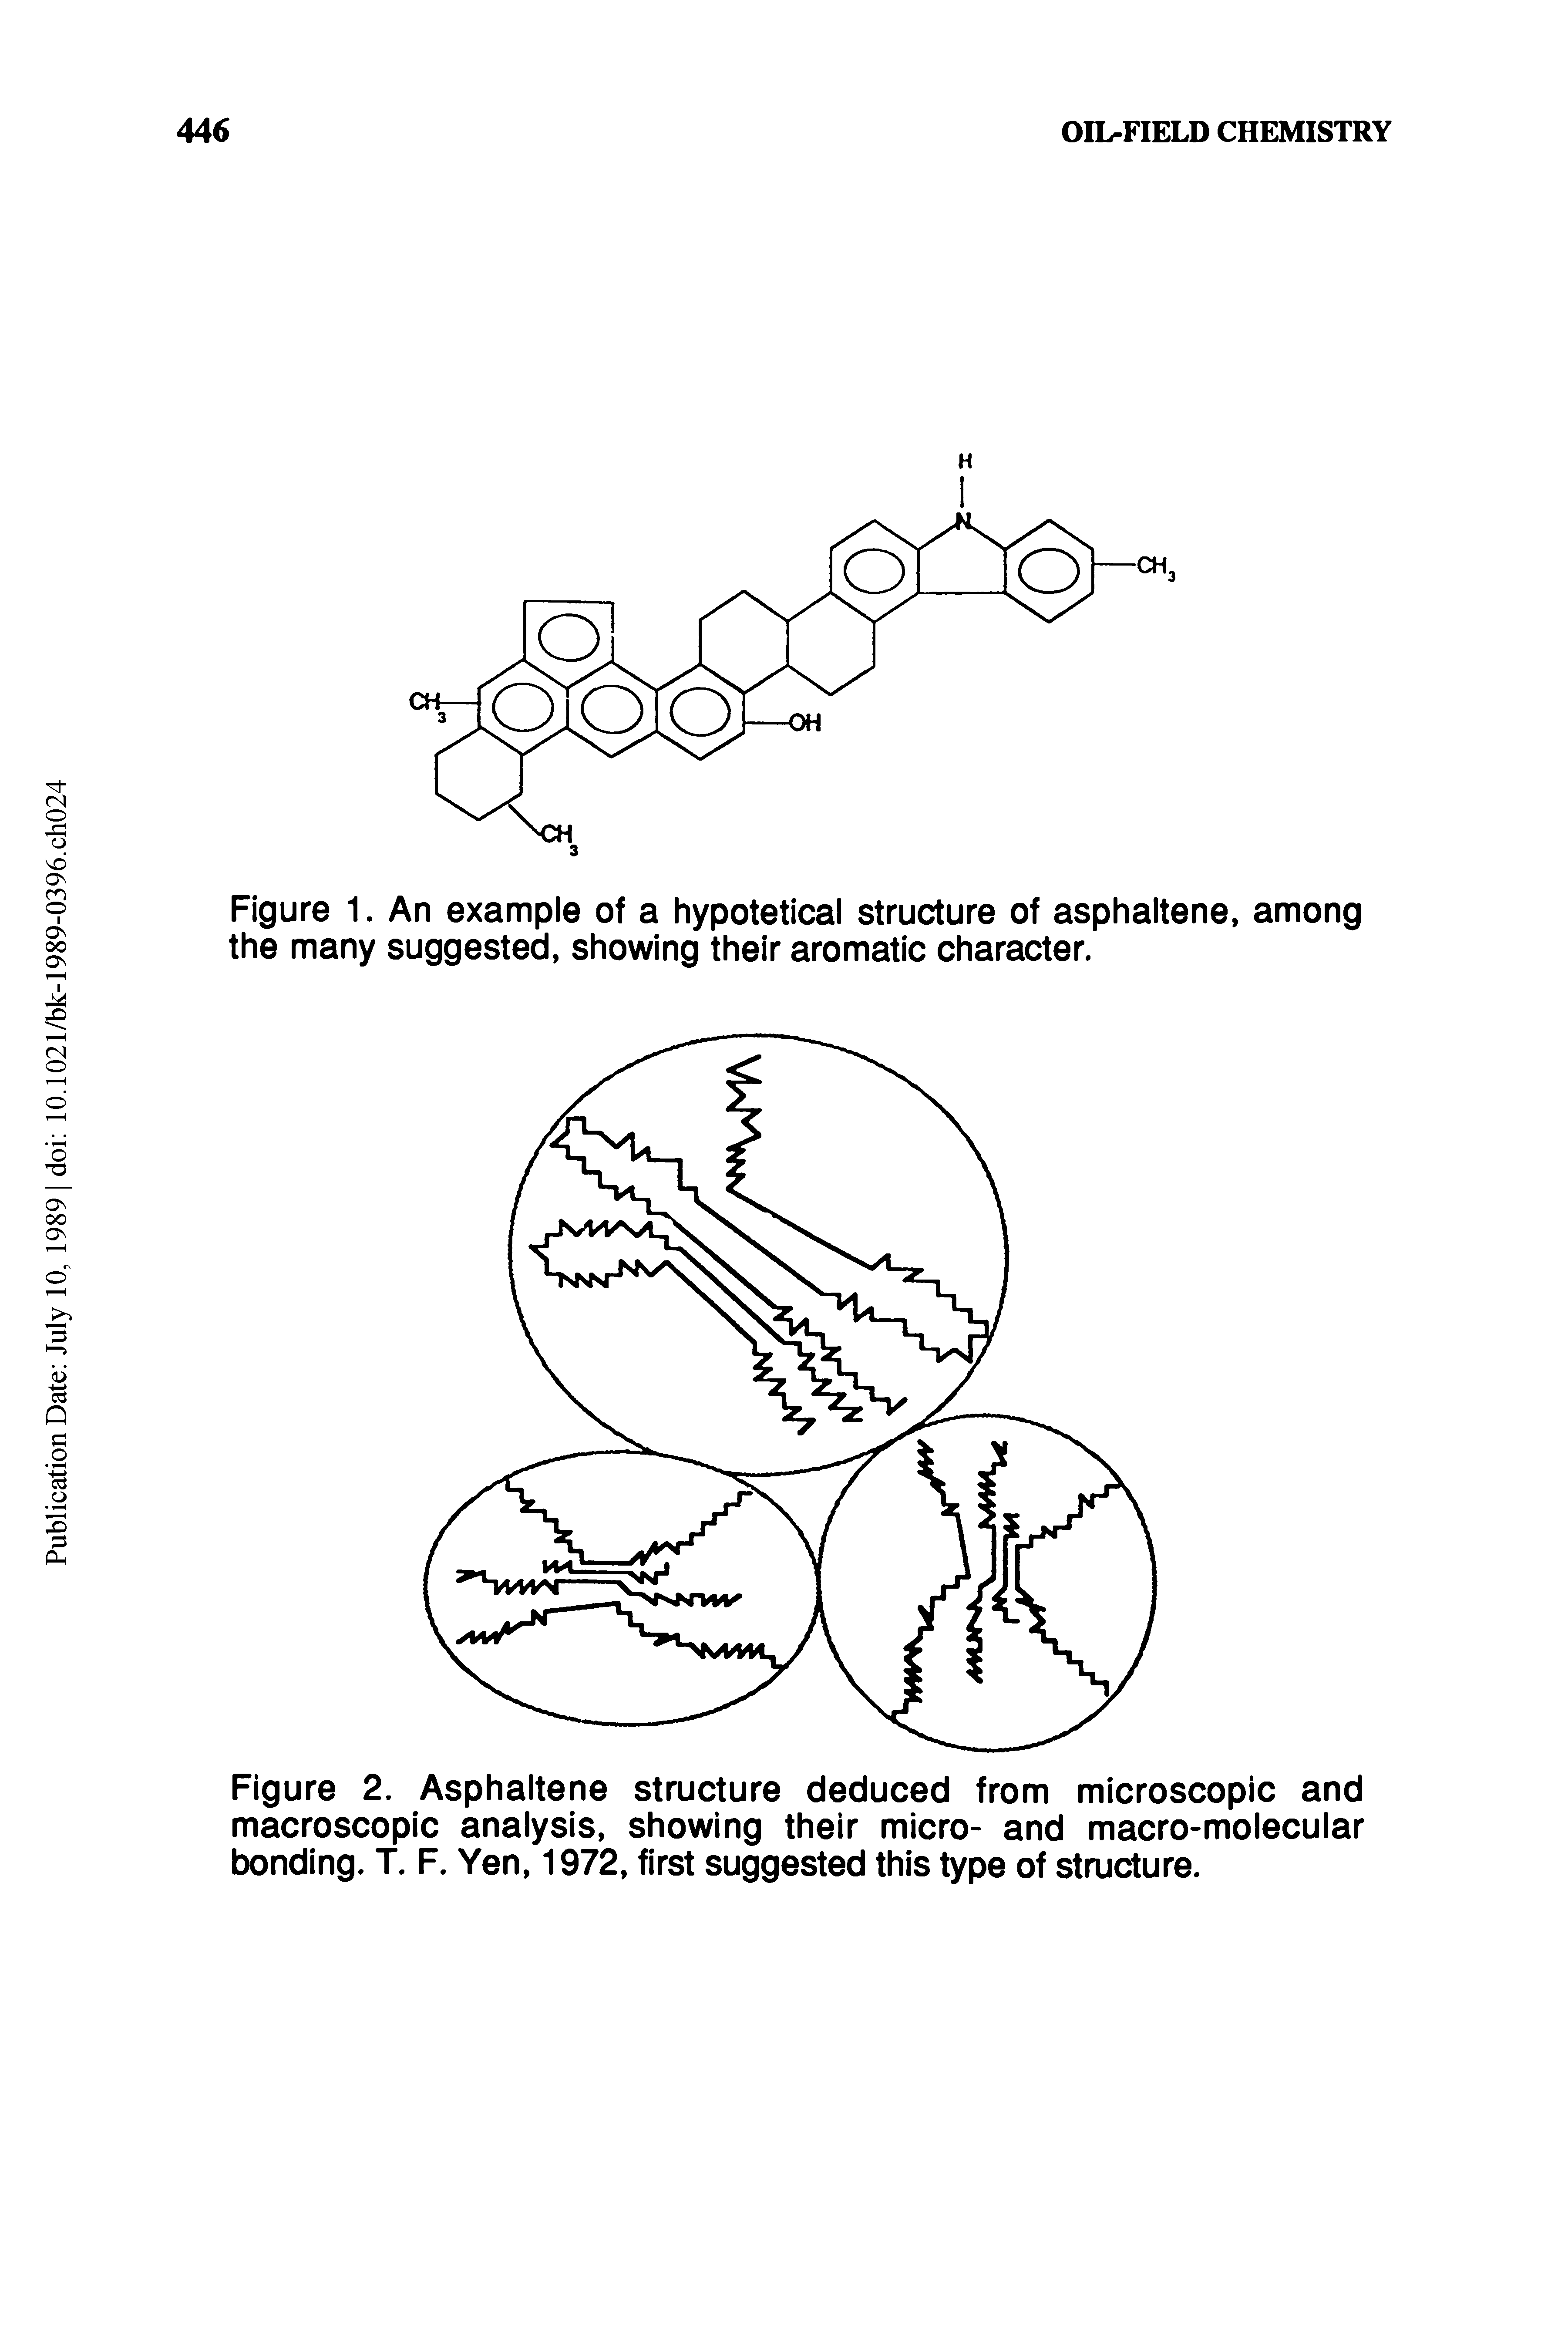 Figure 1. An example of a hypotetical structure of asphaltene, among the many suggested, showing their aromatic character.